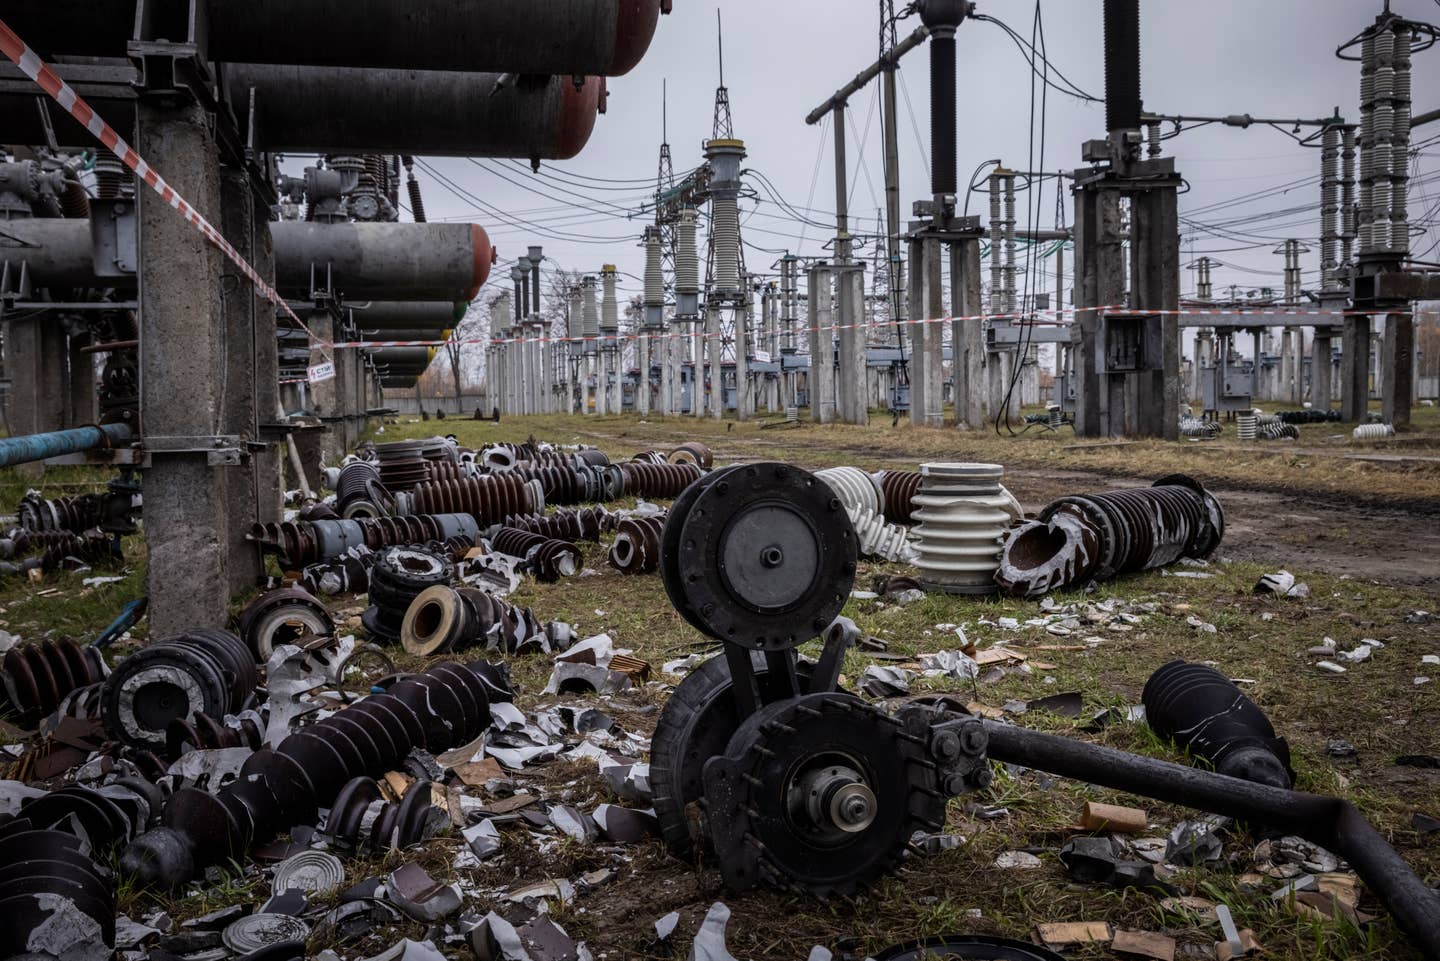 A high voltage substation switchyard stands partially destroyed after the Ukrenergo power station was hit by a missile strike. (Photo by Ed Ram/Getty Images)